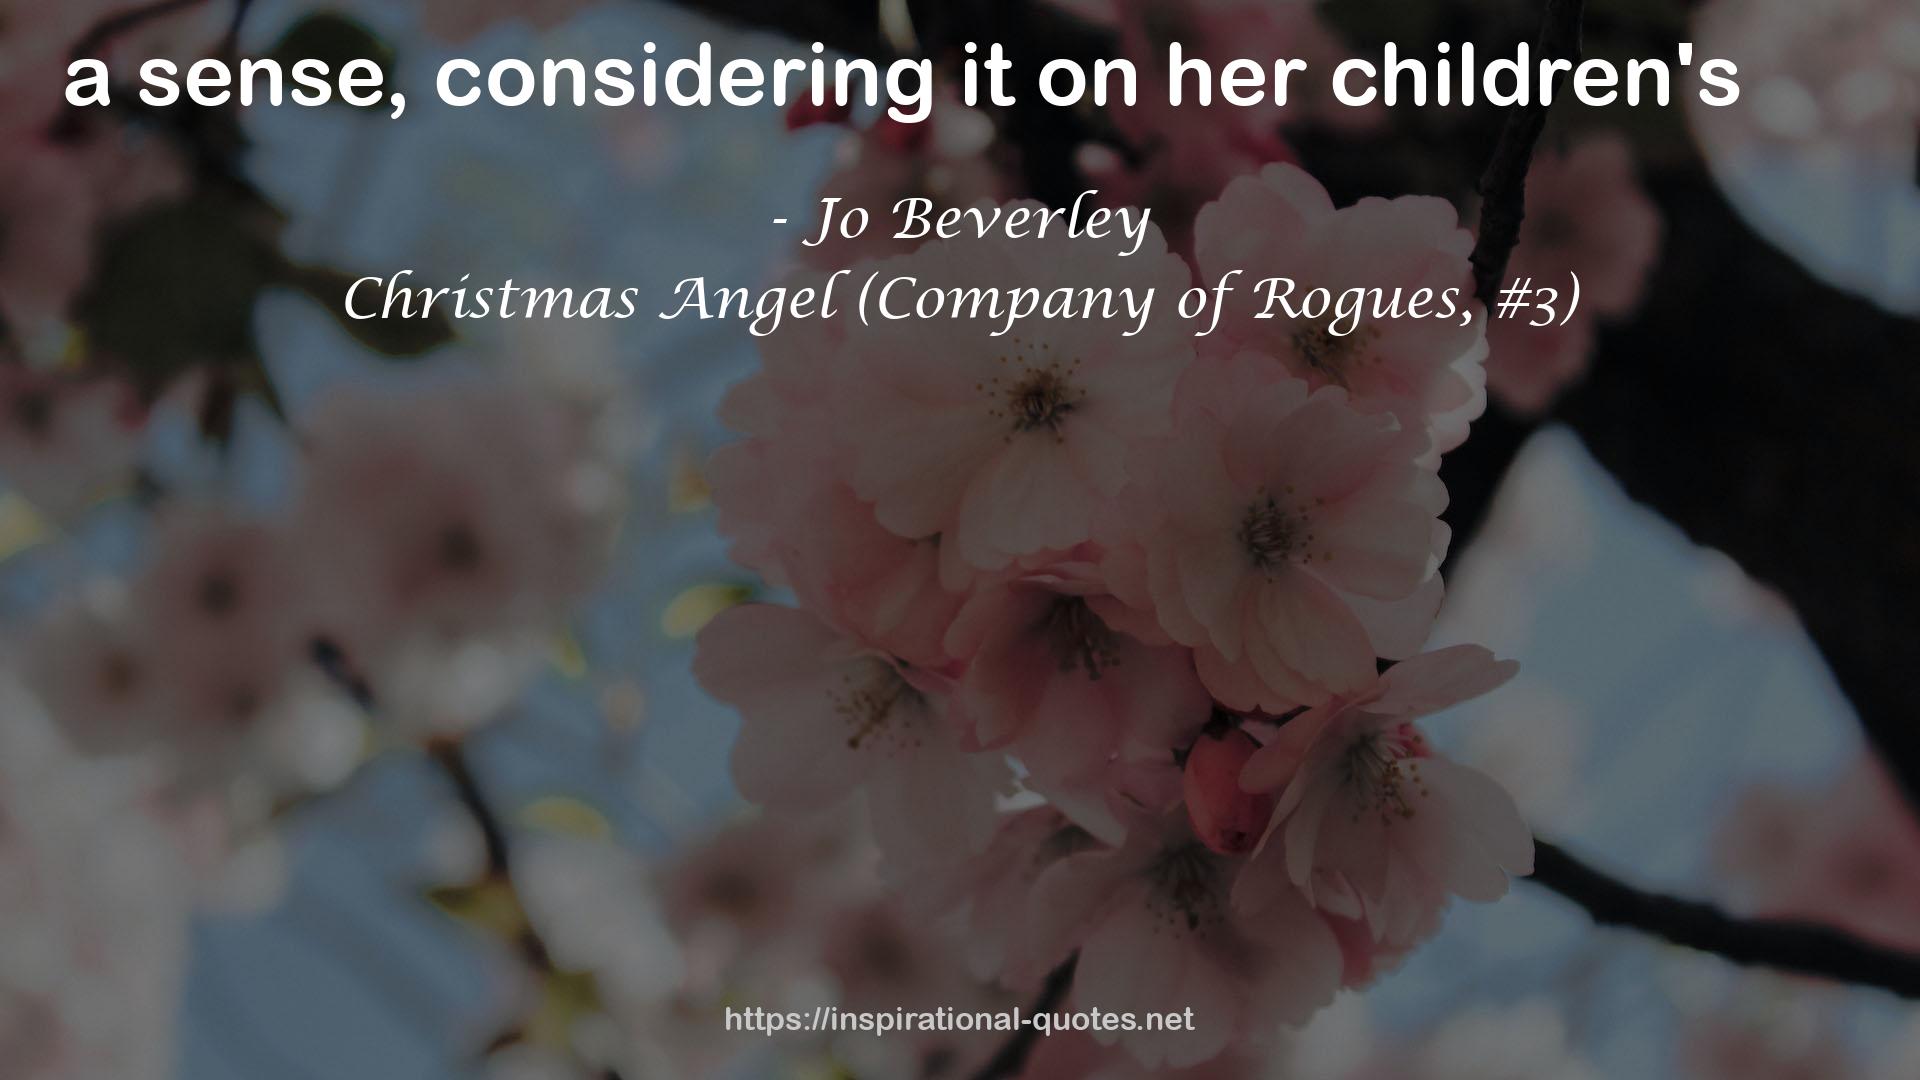 Christmas Angel (Company of Rogues, #3) QUOTES